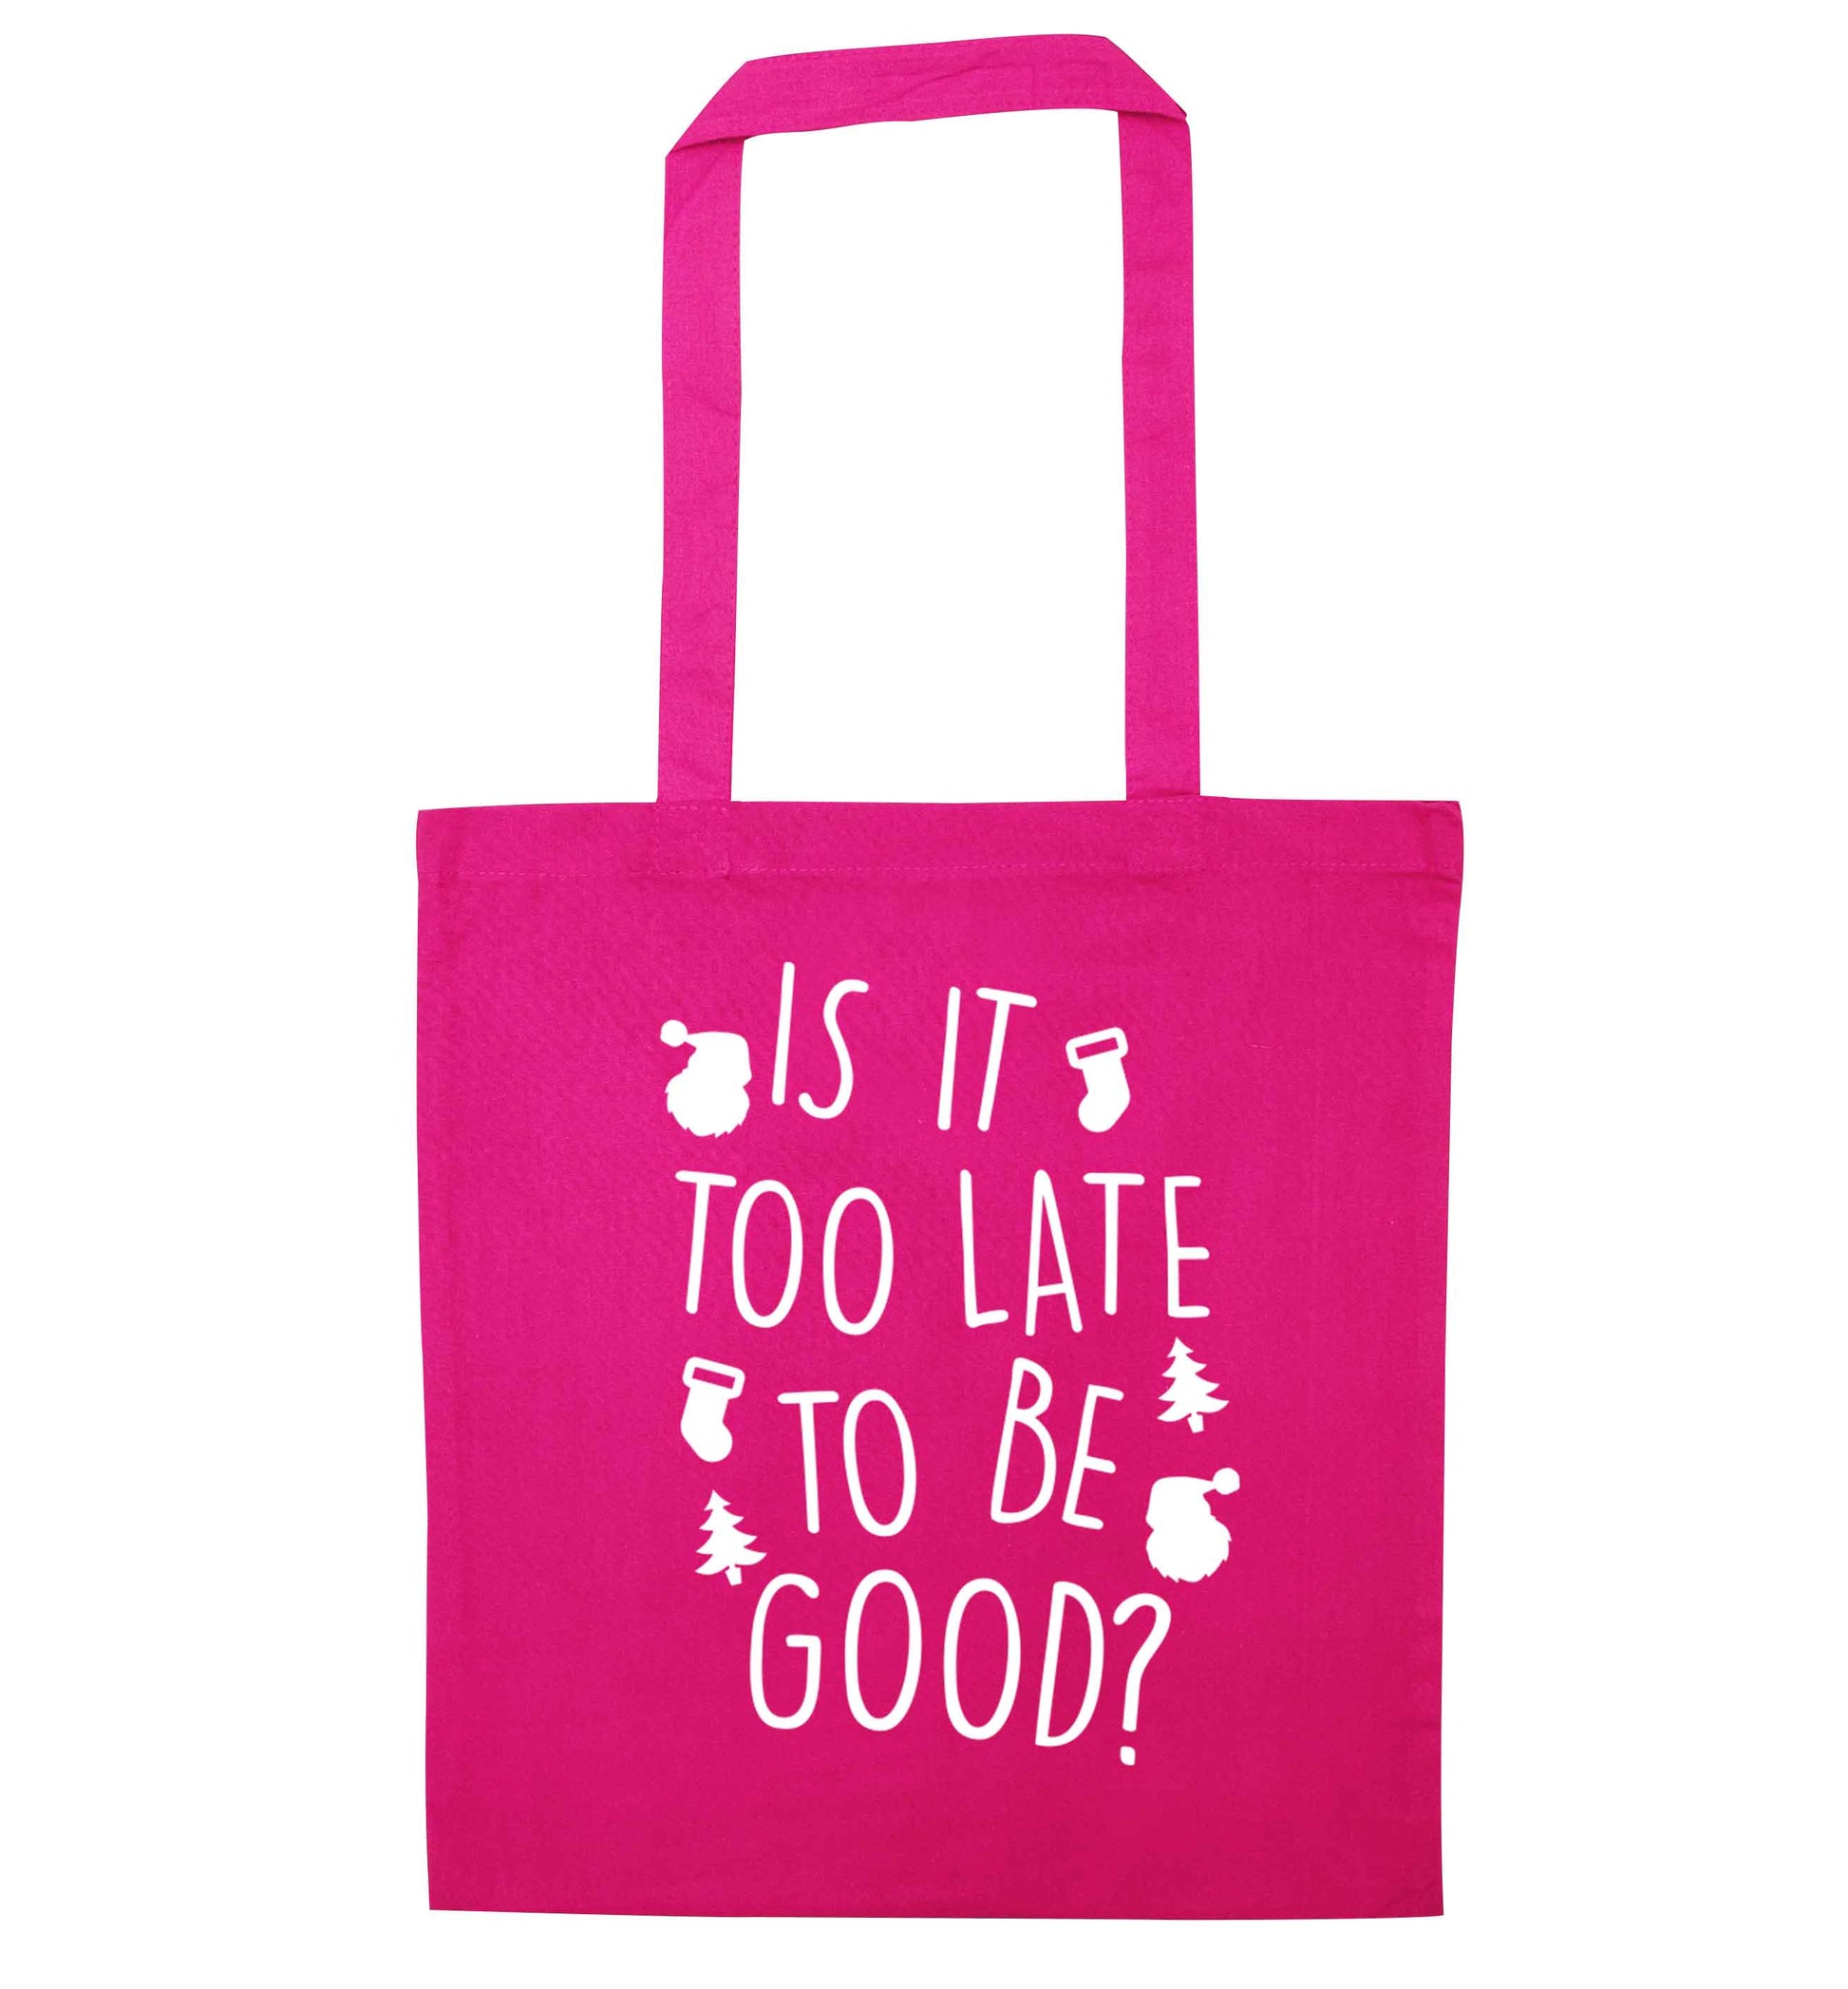 Too Late to be Good pink tote bag